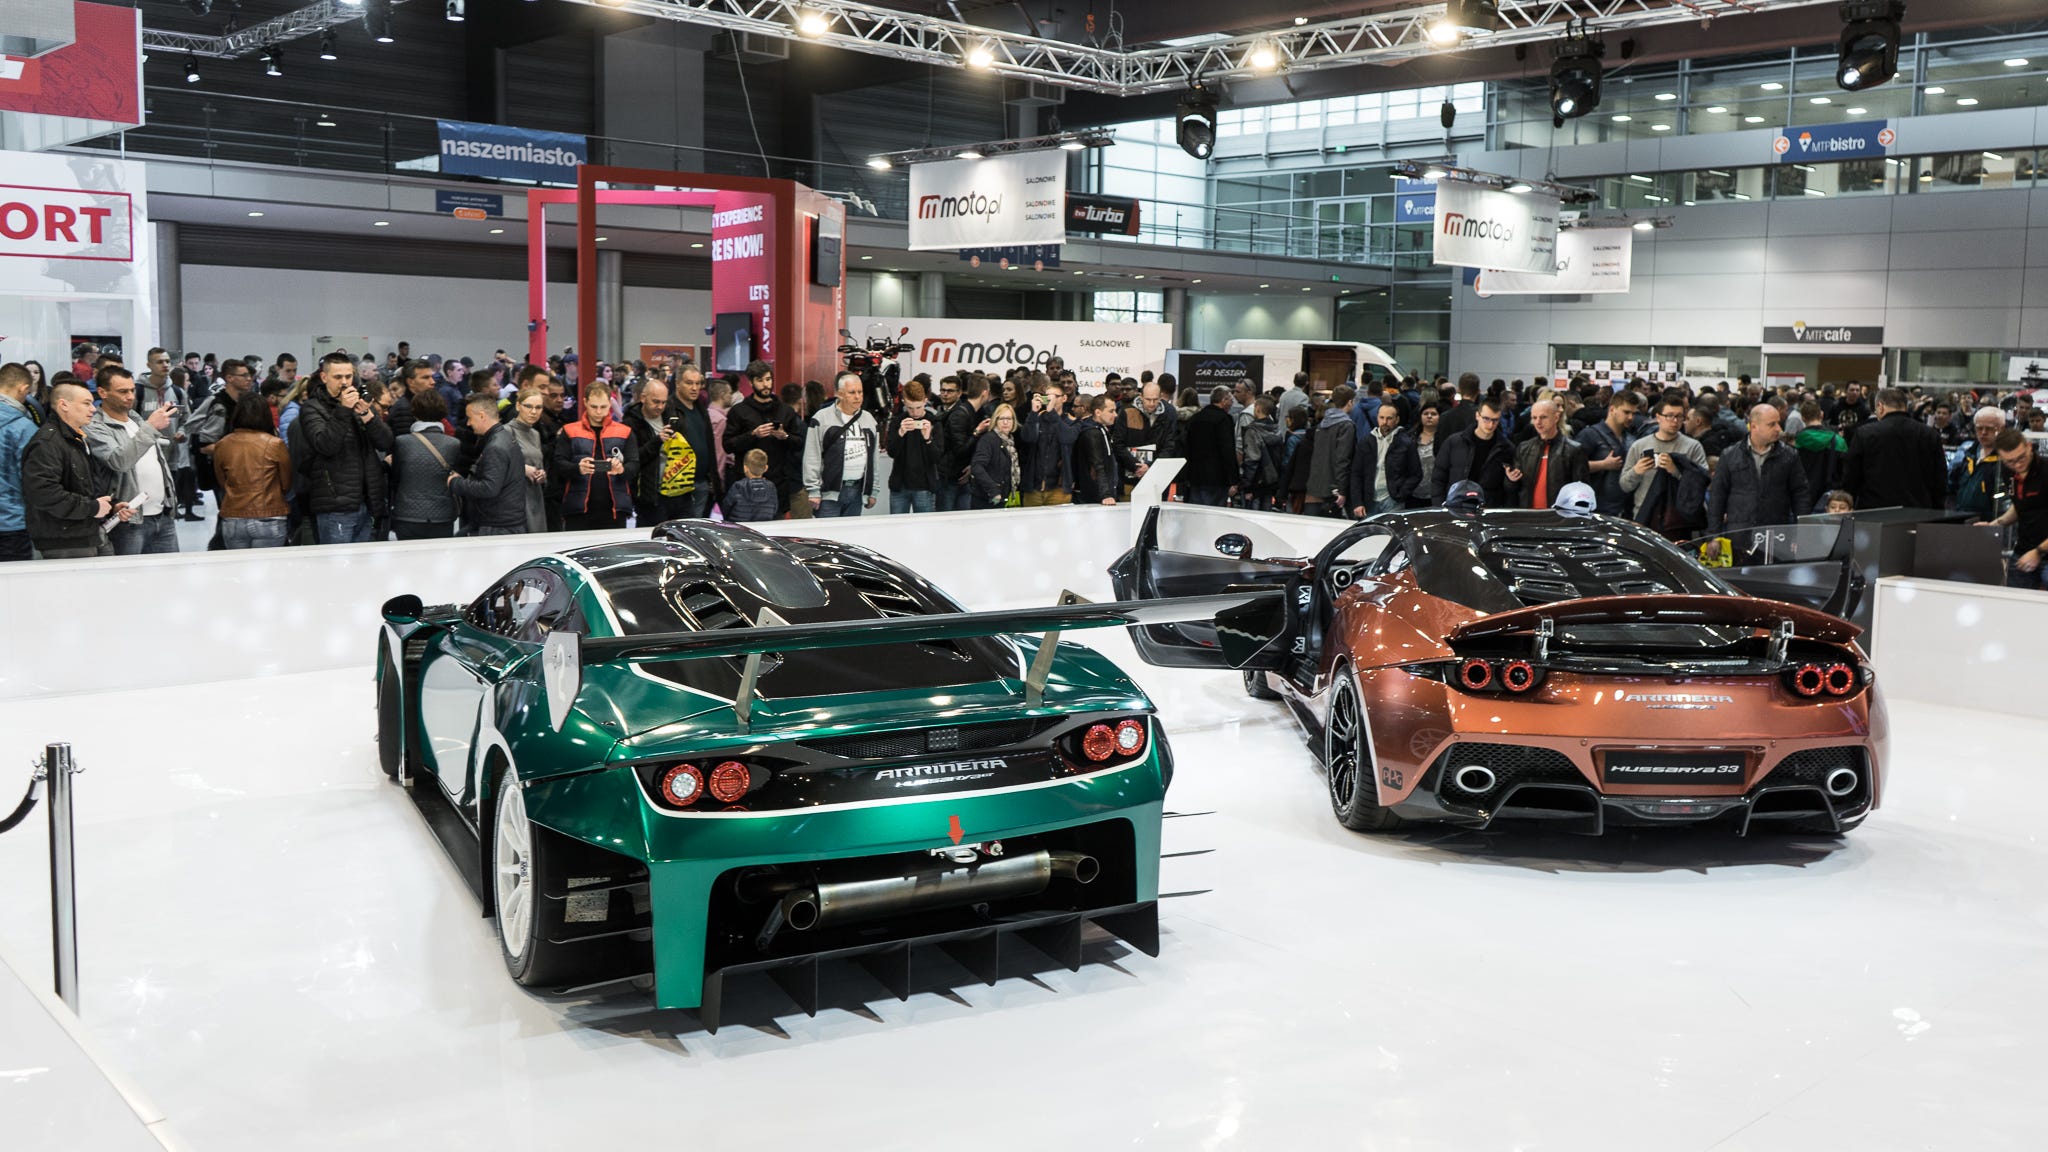 Racing And Road Prototype Of Arrinera On Motor Show Poznan Images, Photos, Reviews